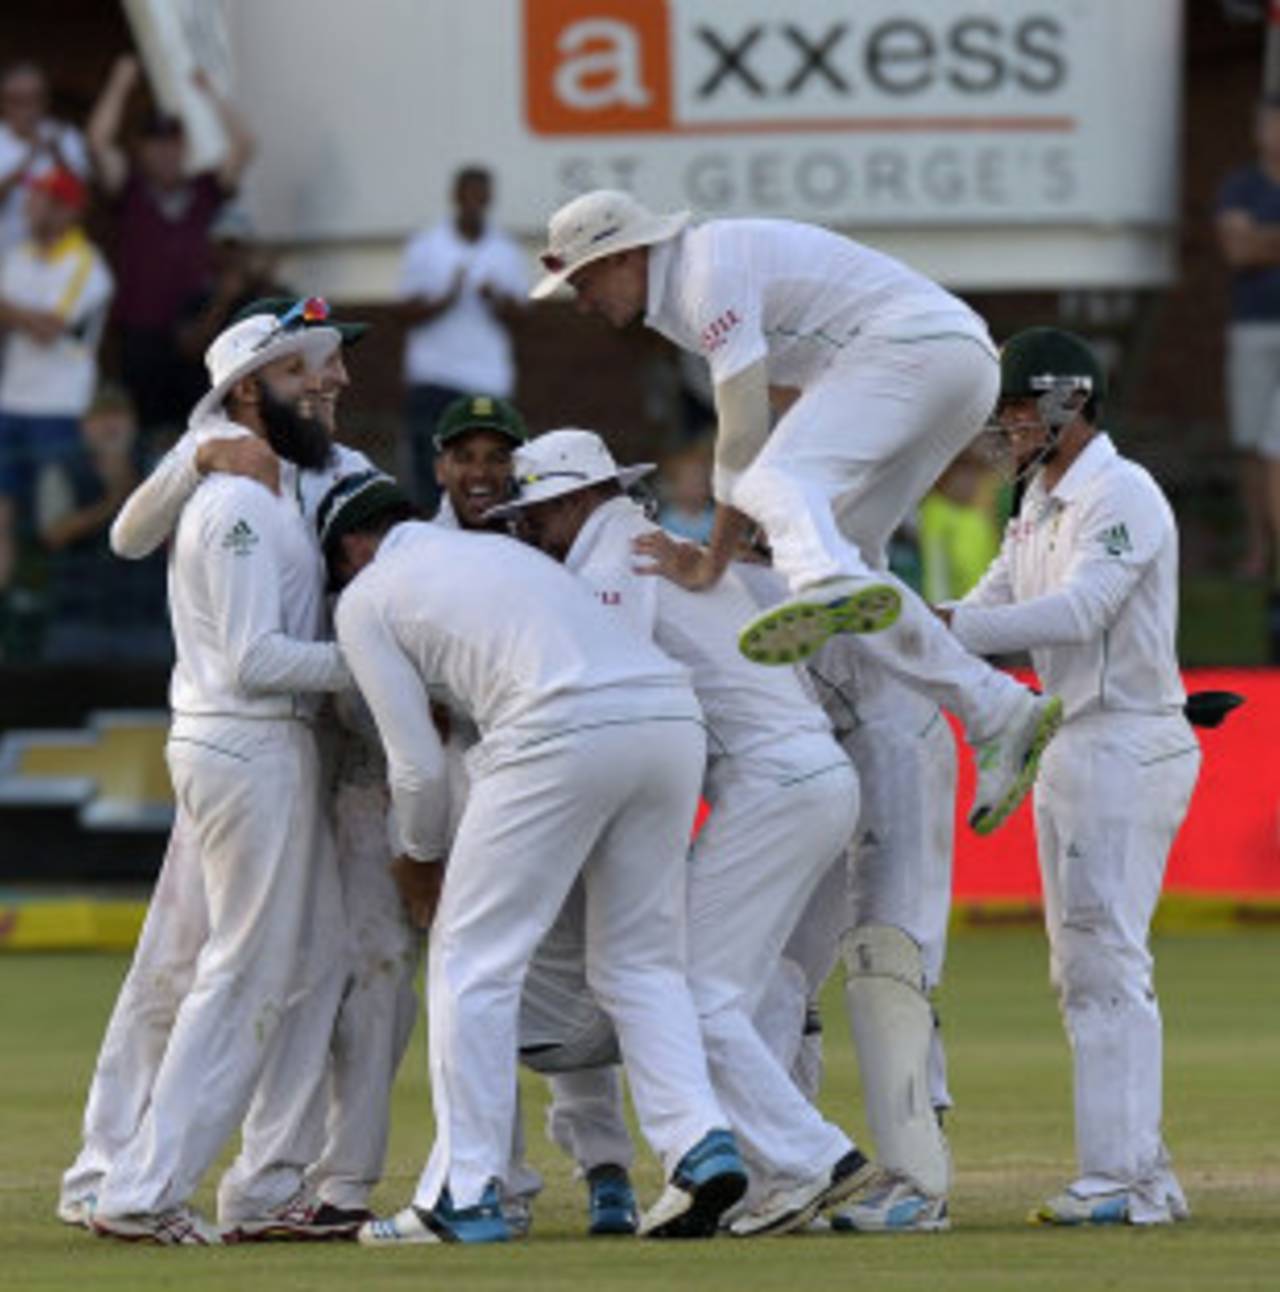 The South Africa players celebrate their victory, South Africa v Australia, 2nd Test, Port Elizabeth, 4th day, February 23, 2014